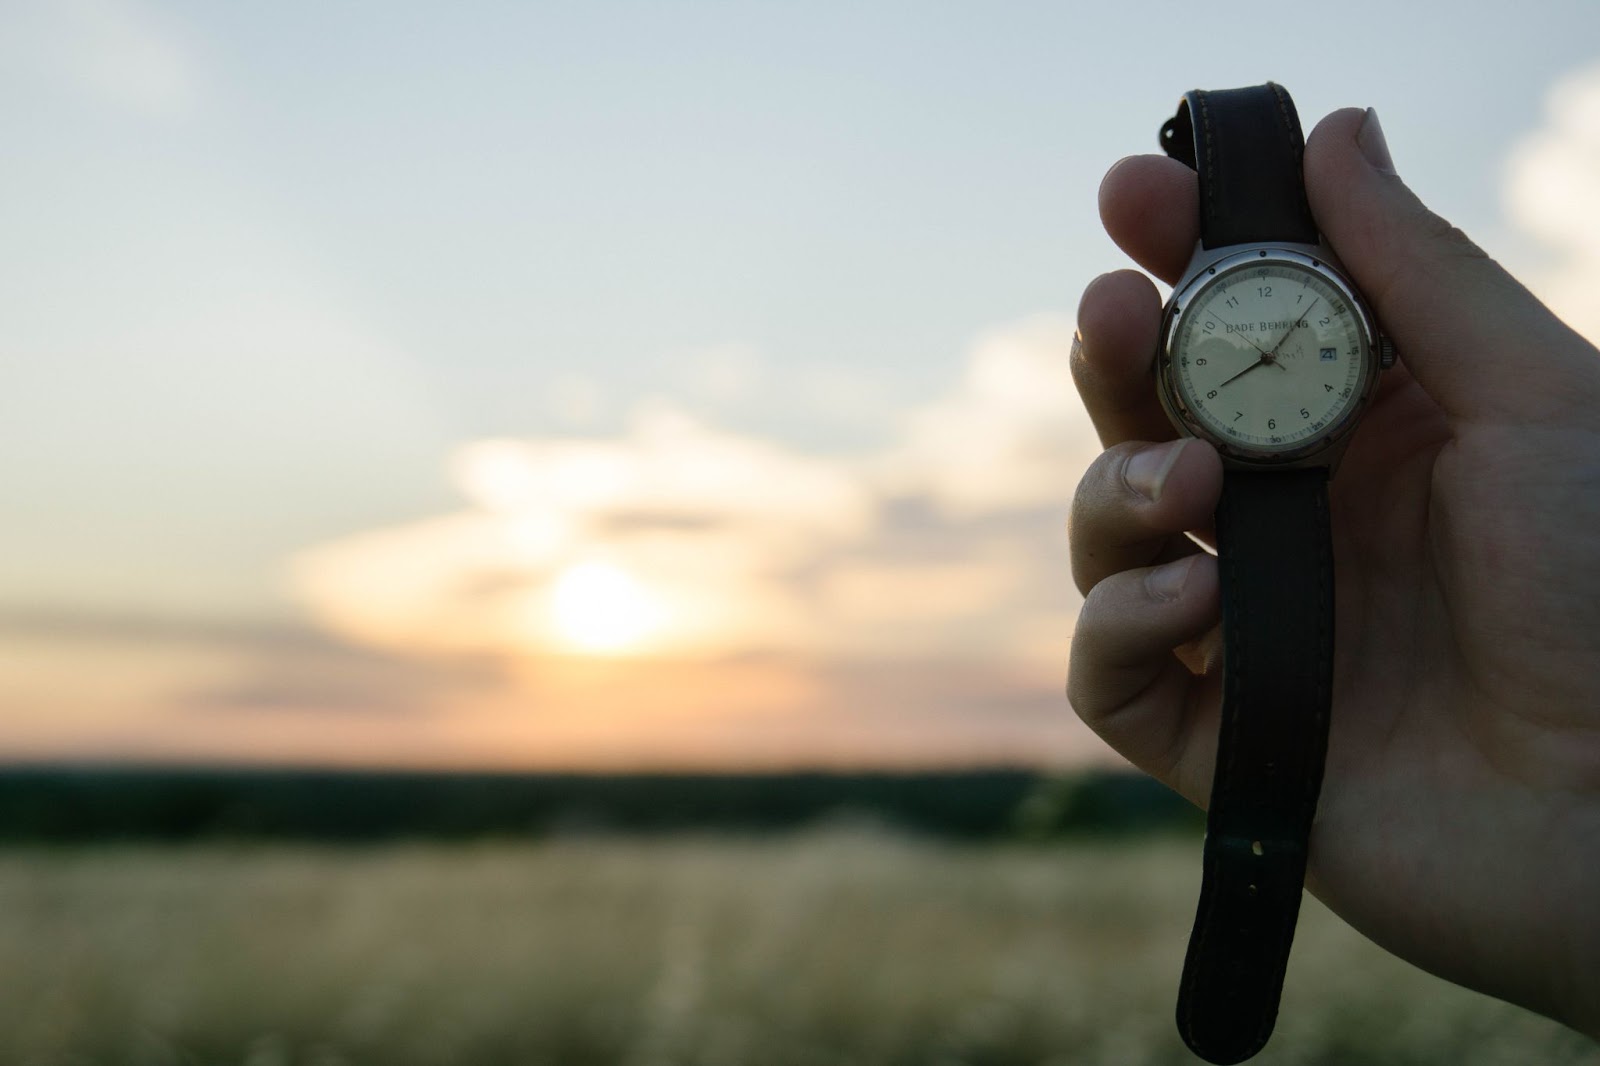 Photo of a person holding an analog watch in front of a field with the sun coming up in the distance.